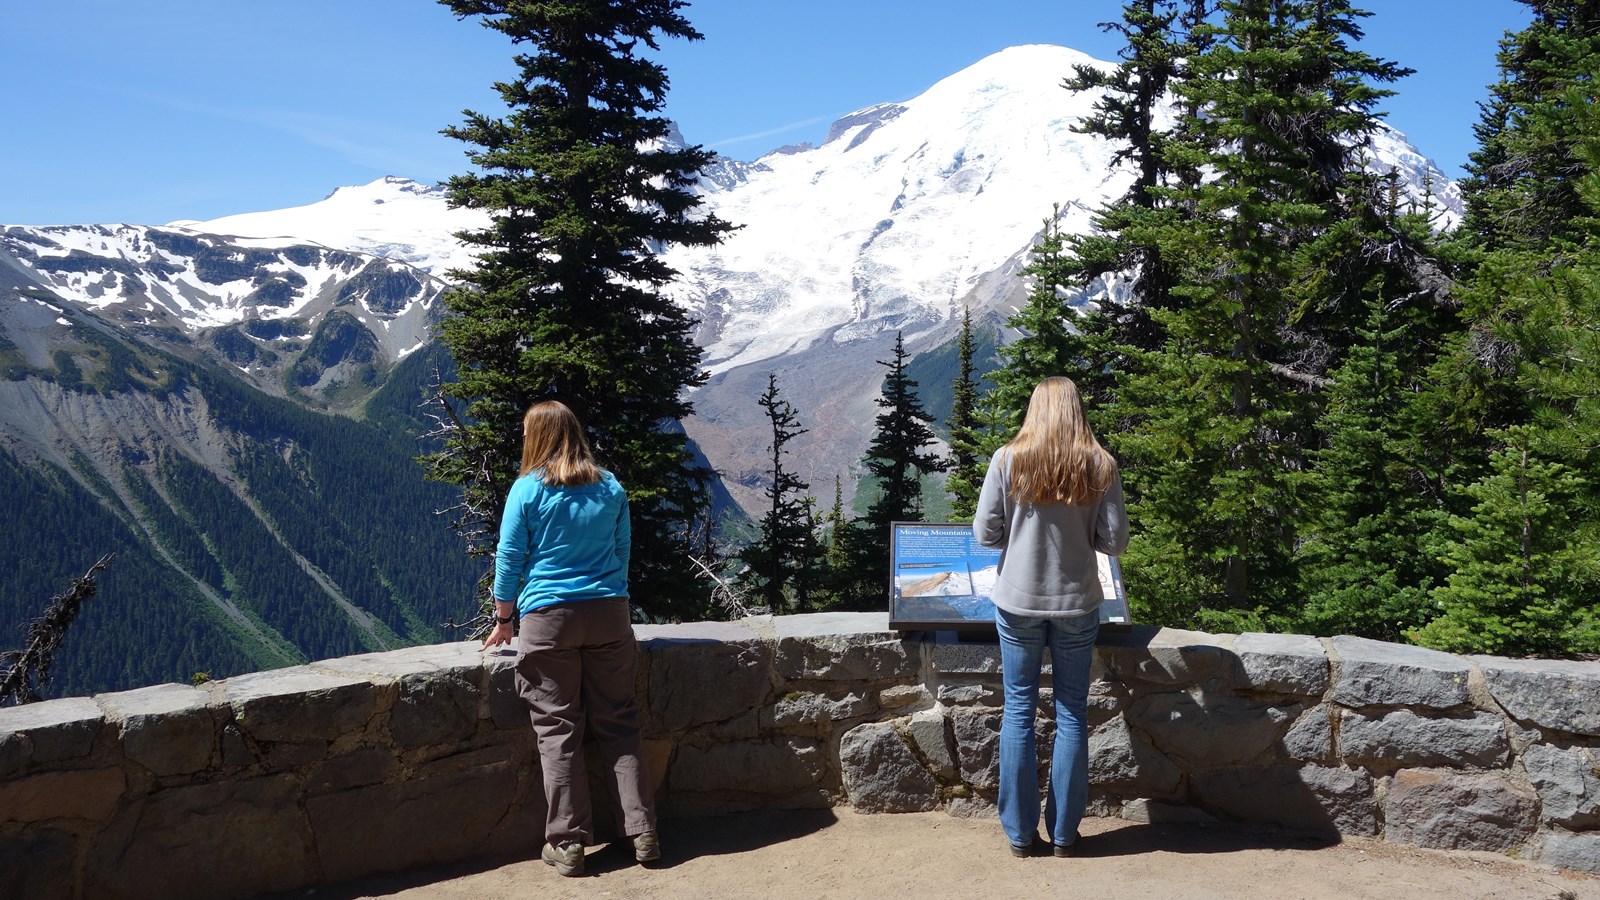 Two women stand next to a low rock wall looking at a view of a glaciated mountain and river valley.